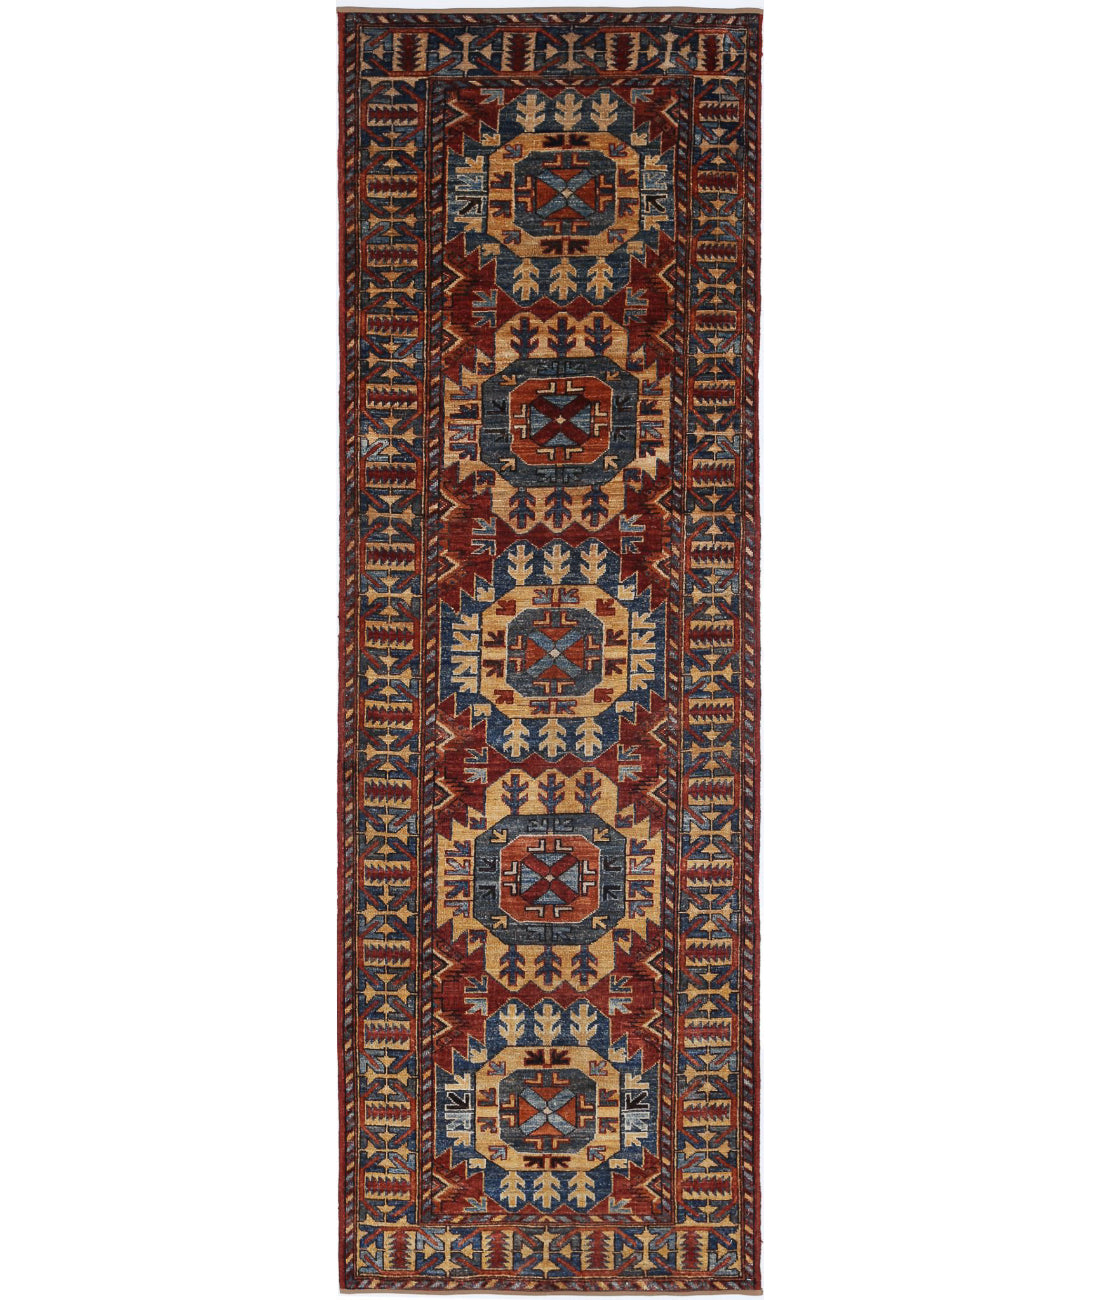 Hand Knotted Nomadic Caucasian Humna Wool Rug - 2&#39;11&#39;&#39; x 9&#39;10&#39;&#39; 2&#39;11&#39;&#39; x 9&#39;10&#39;&#39; (88 X 295) / Red / Multi